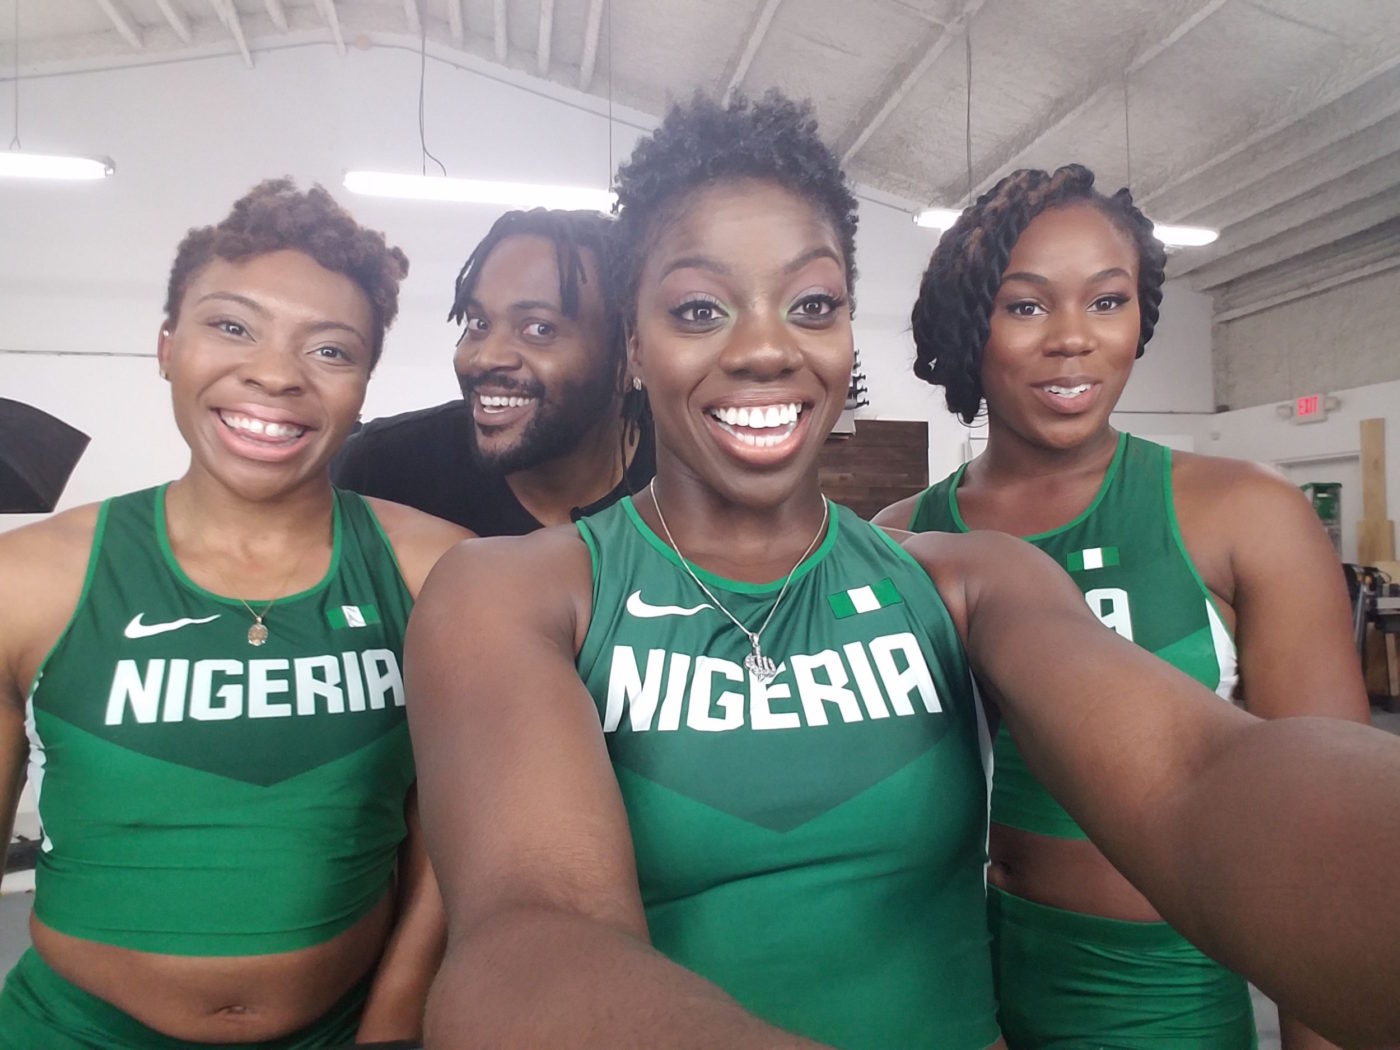 Behind+the+scenes+with+the+Nigeria+Women%E2%80%99s+Bobsled+team+with+photographer%2C+Obi+Grant.+Photo+courtesy+of+Seun+Adigun..jpg?format=1500w